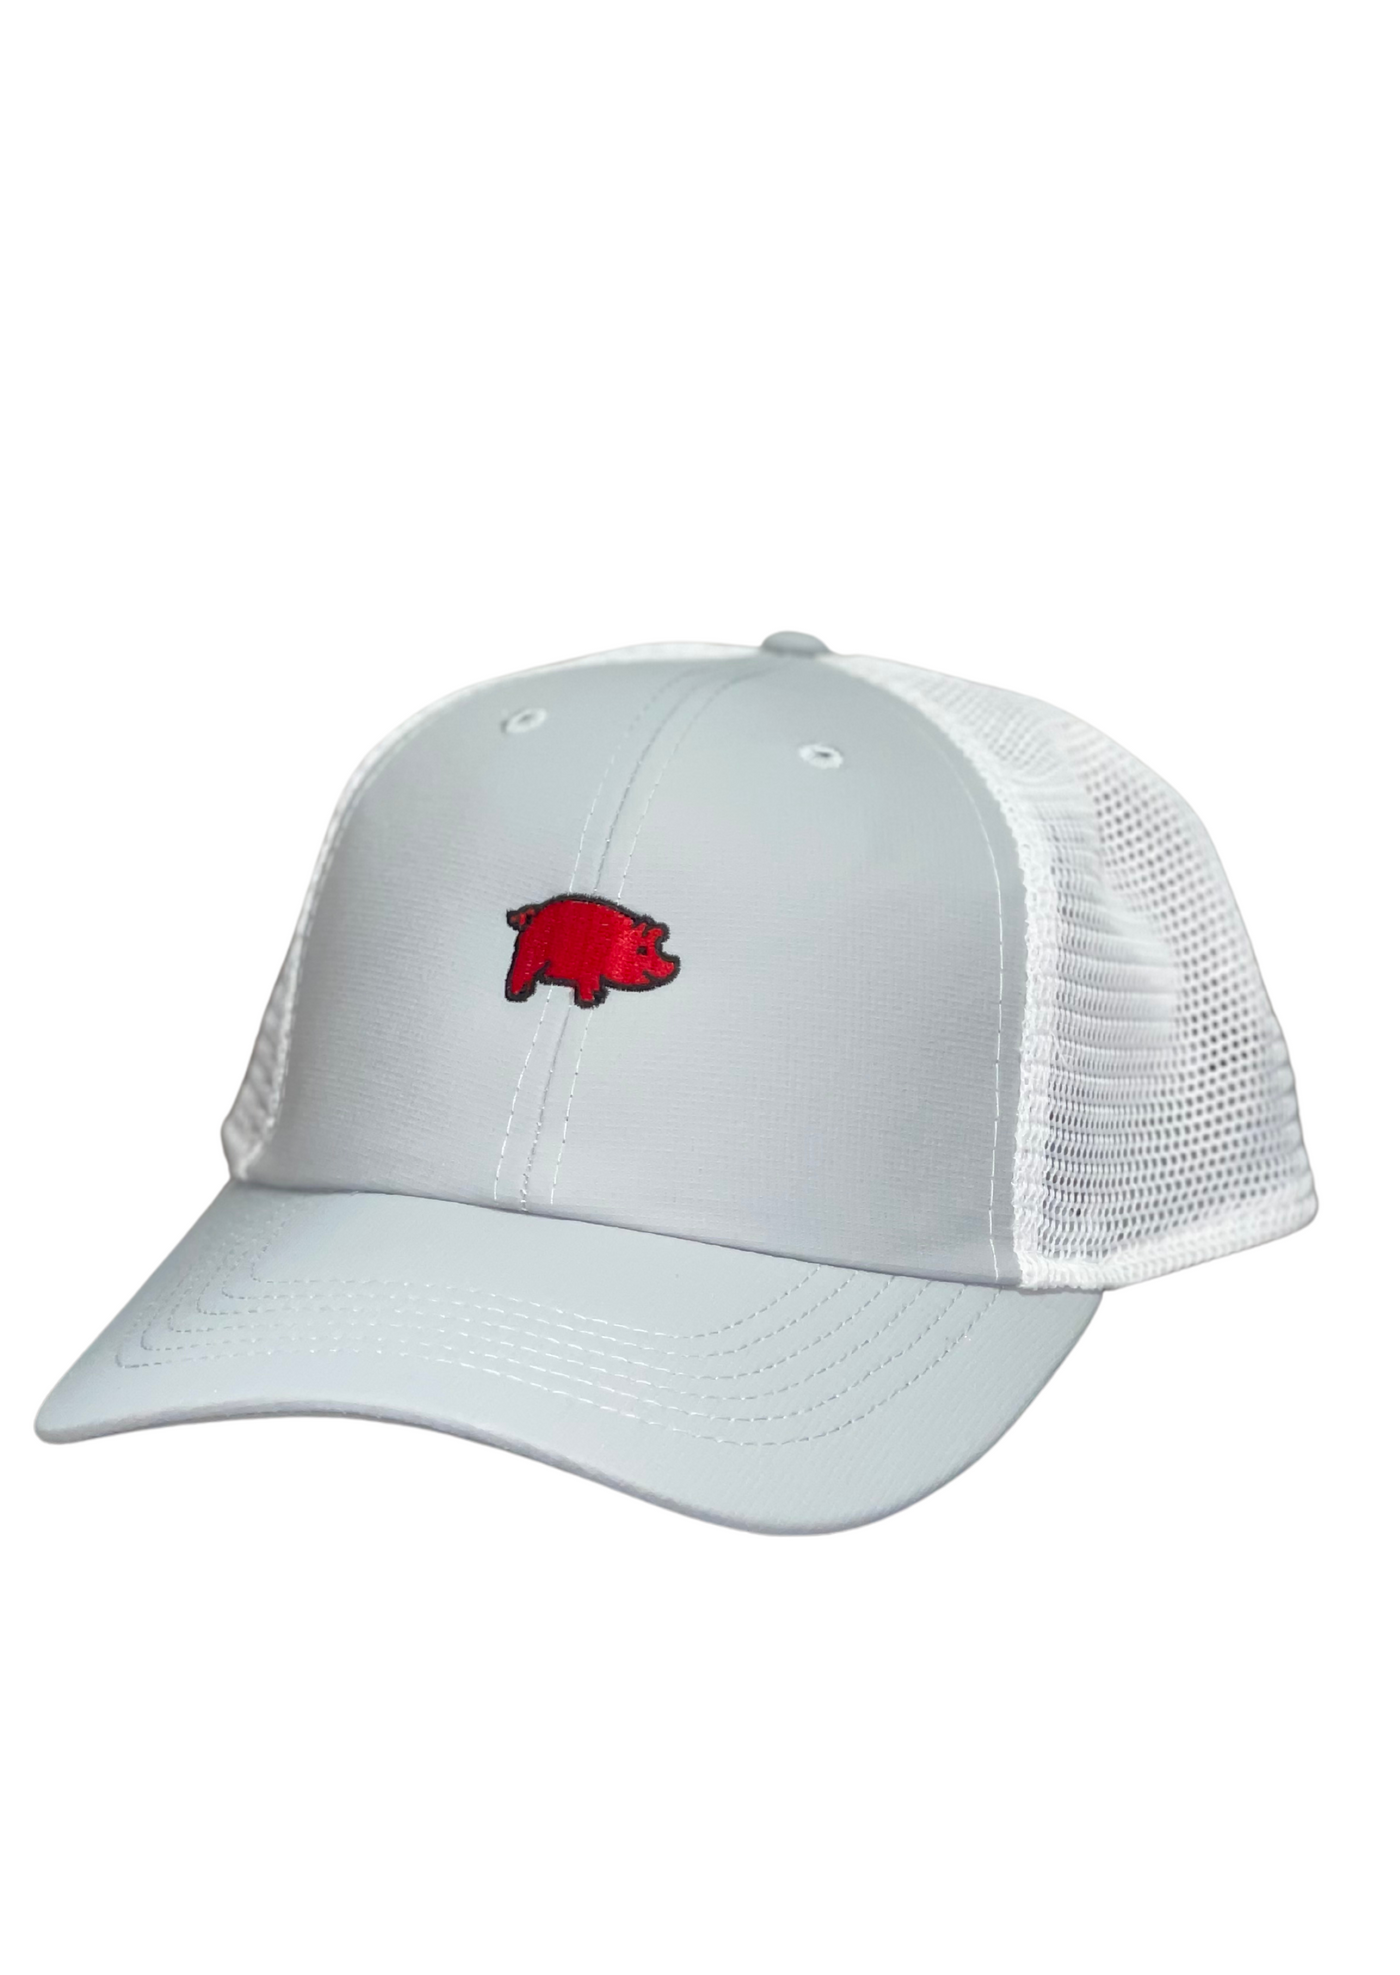 Structured Performance Meshback Cap